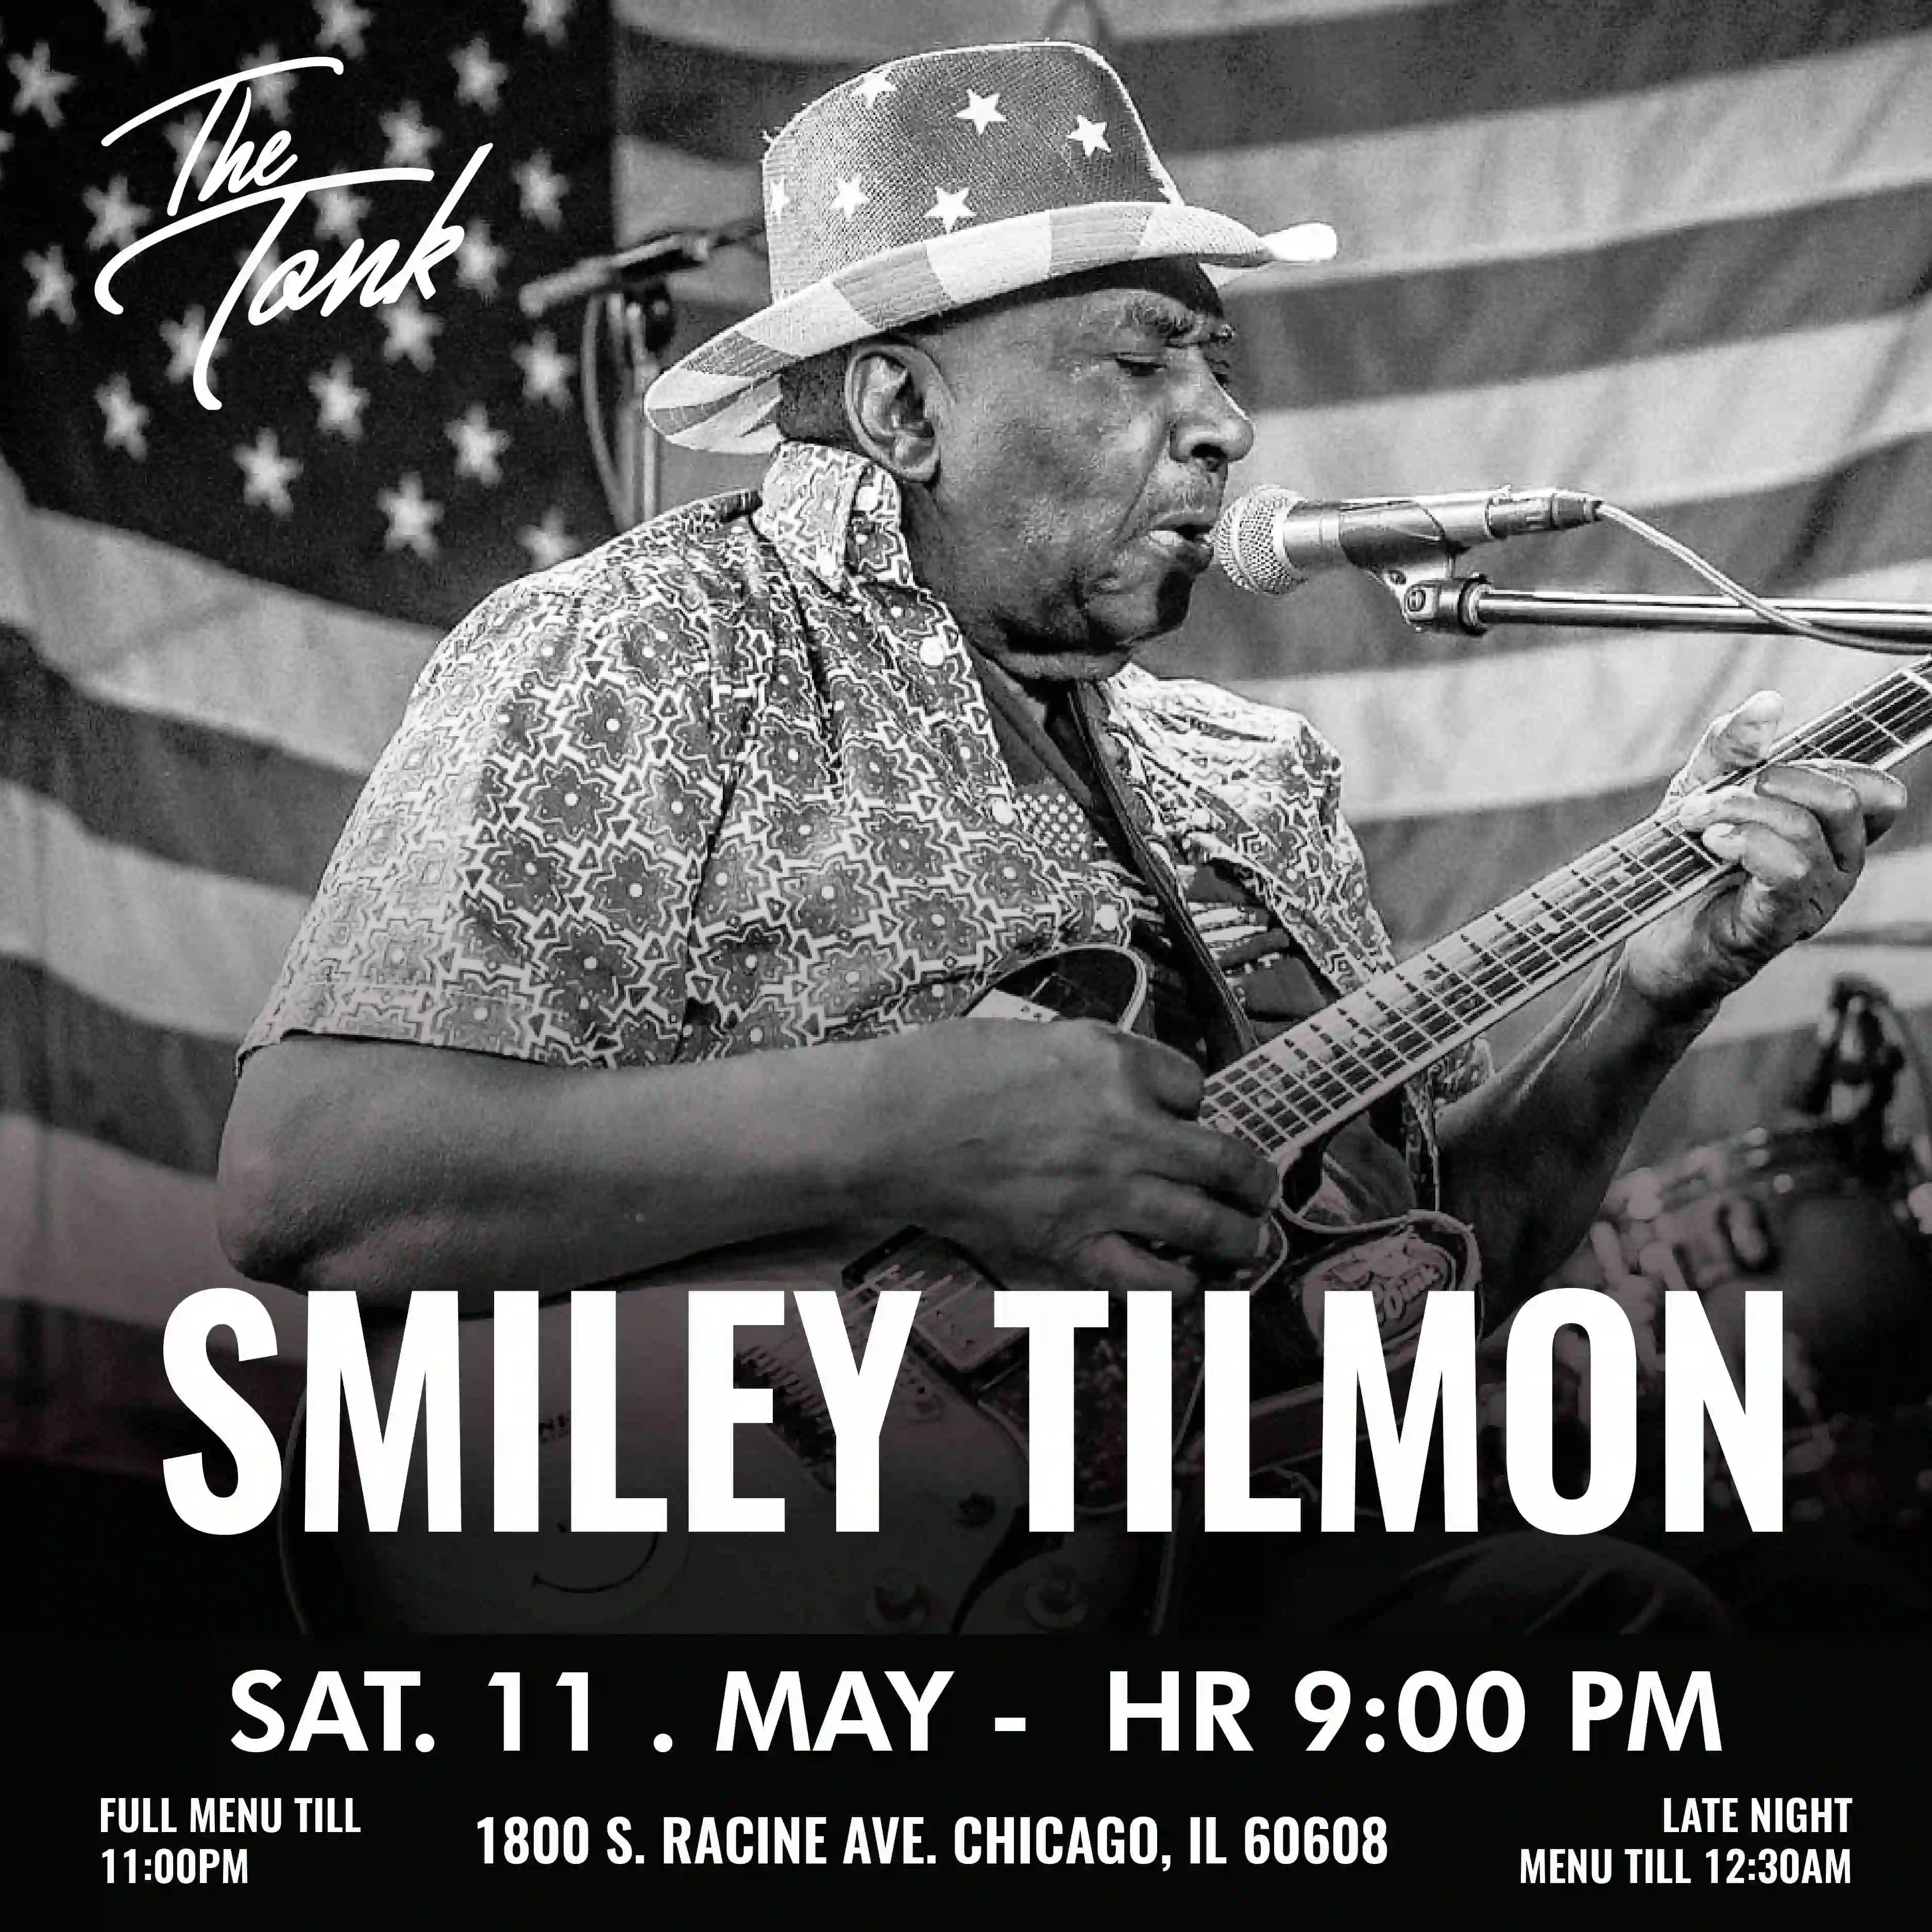 Smiley Tilmon Band Featuring Kate Moss artist poster